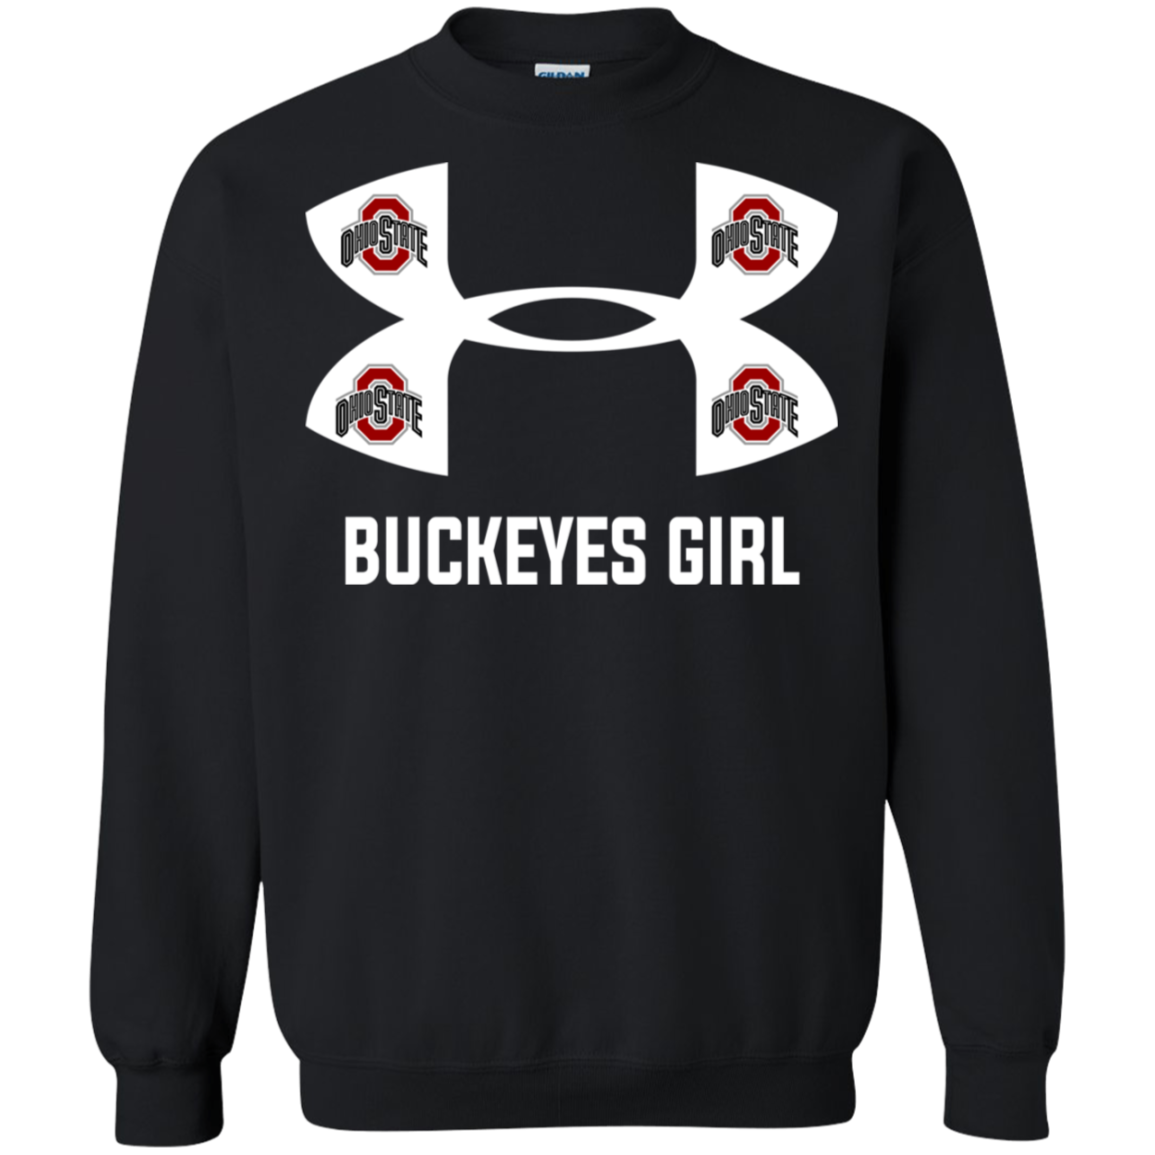 Check out this awesome Ohio State Buckeyes Girl Under Armour Football ...